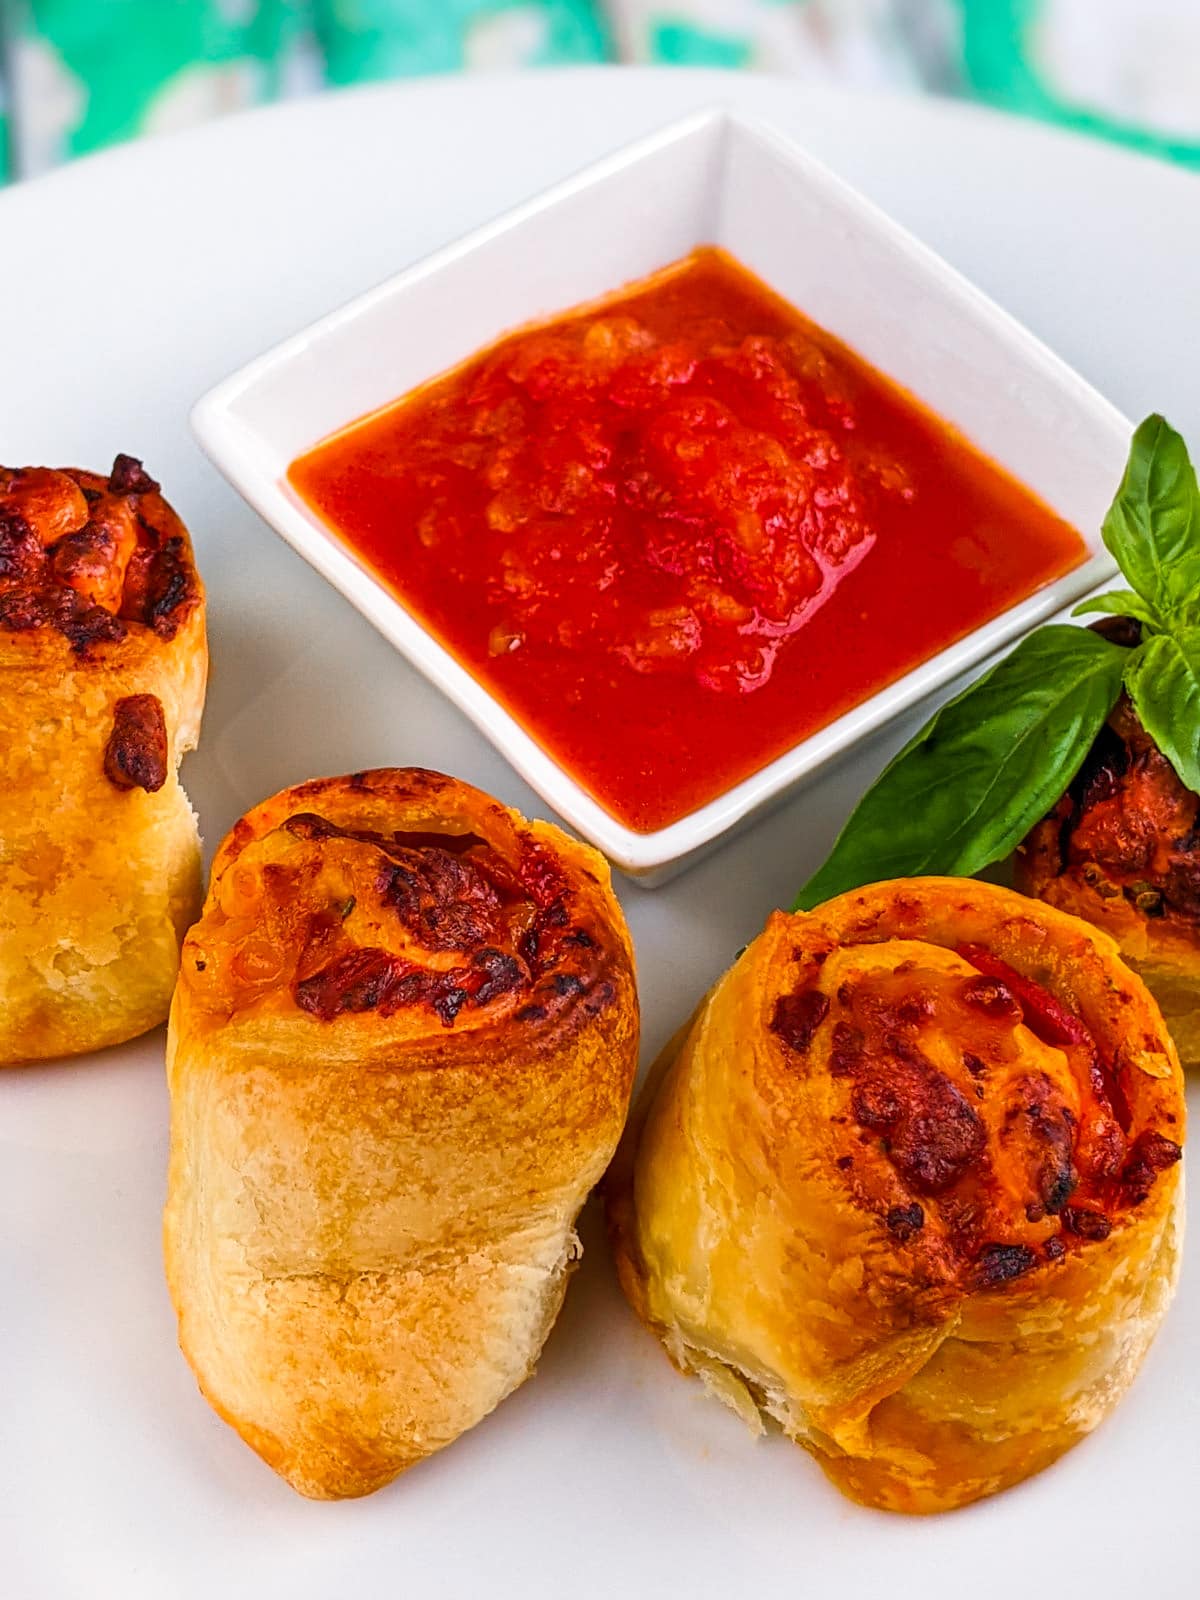 4 pizza rolls with basil leaves and tomato sauce on white plate.